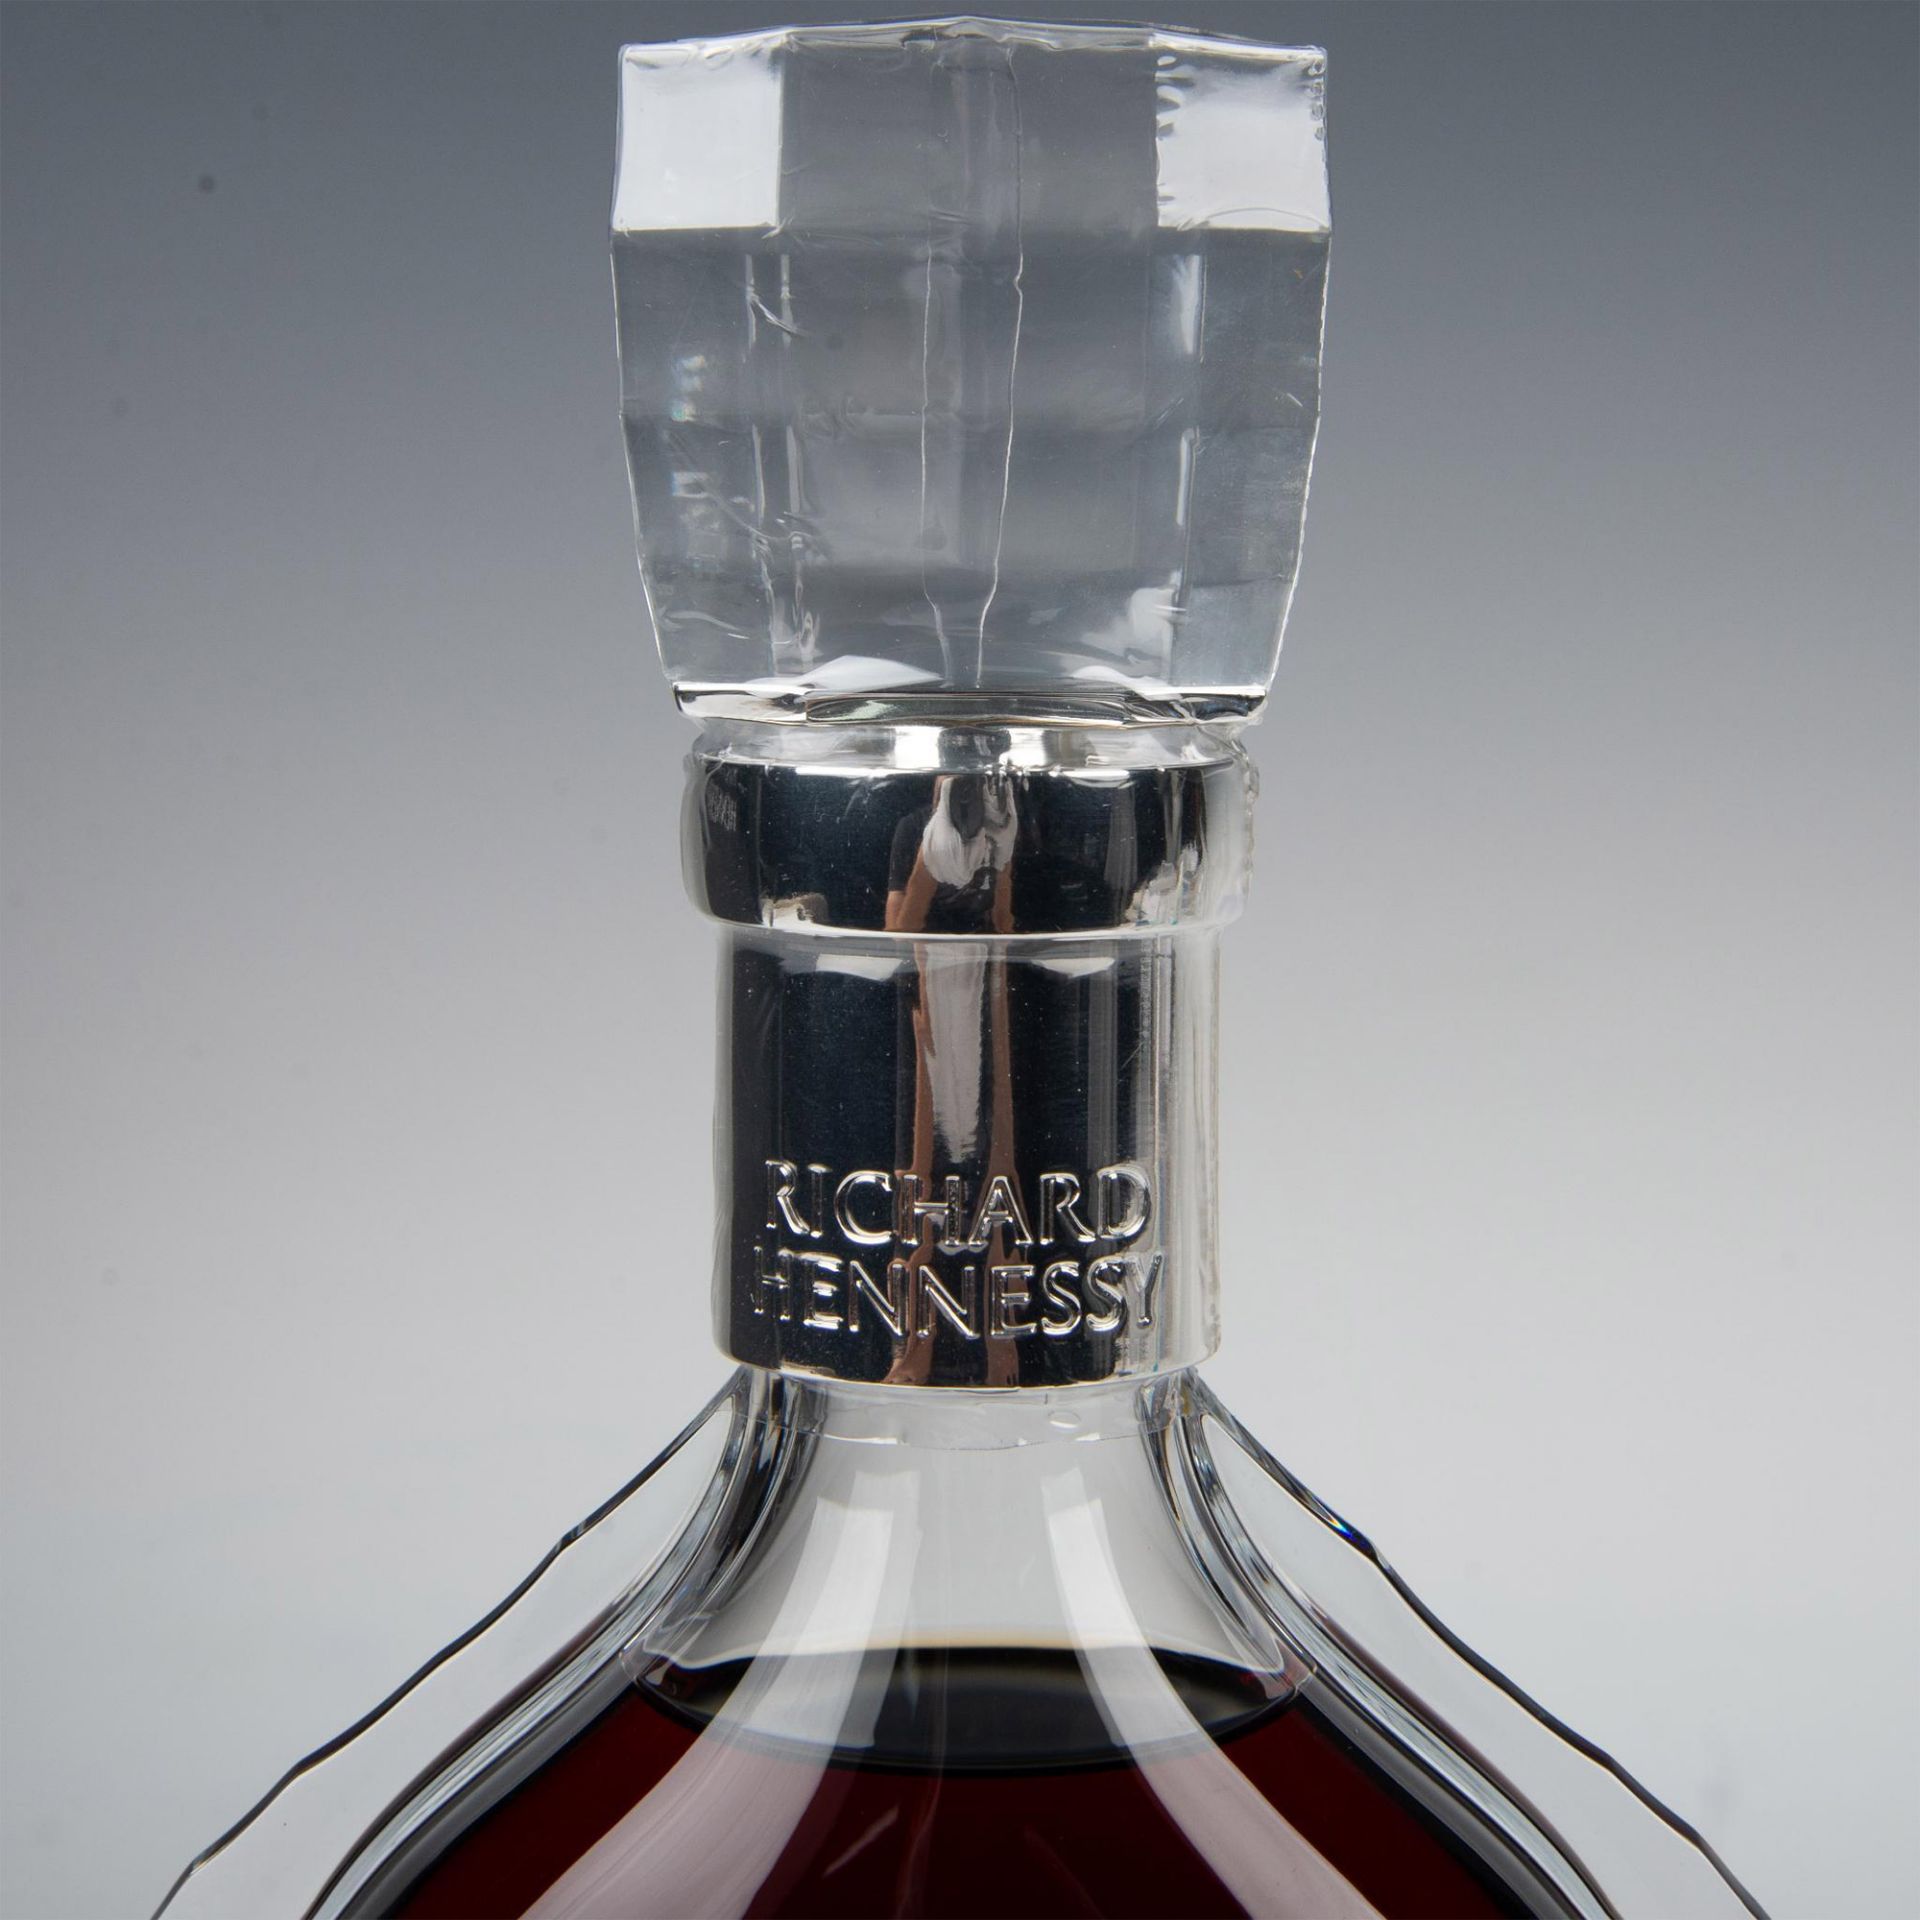 Richard Hennessy & Co. Cognac, Baccarat Crystal - Image 8 of 19